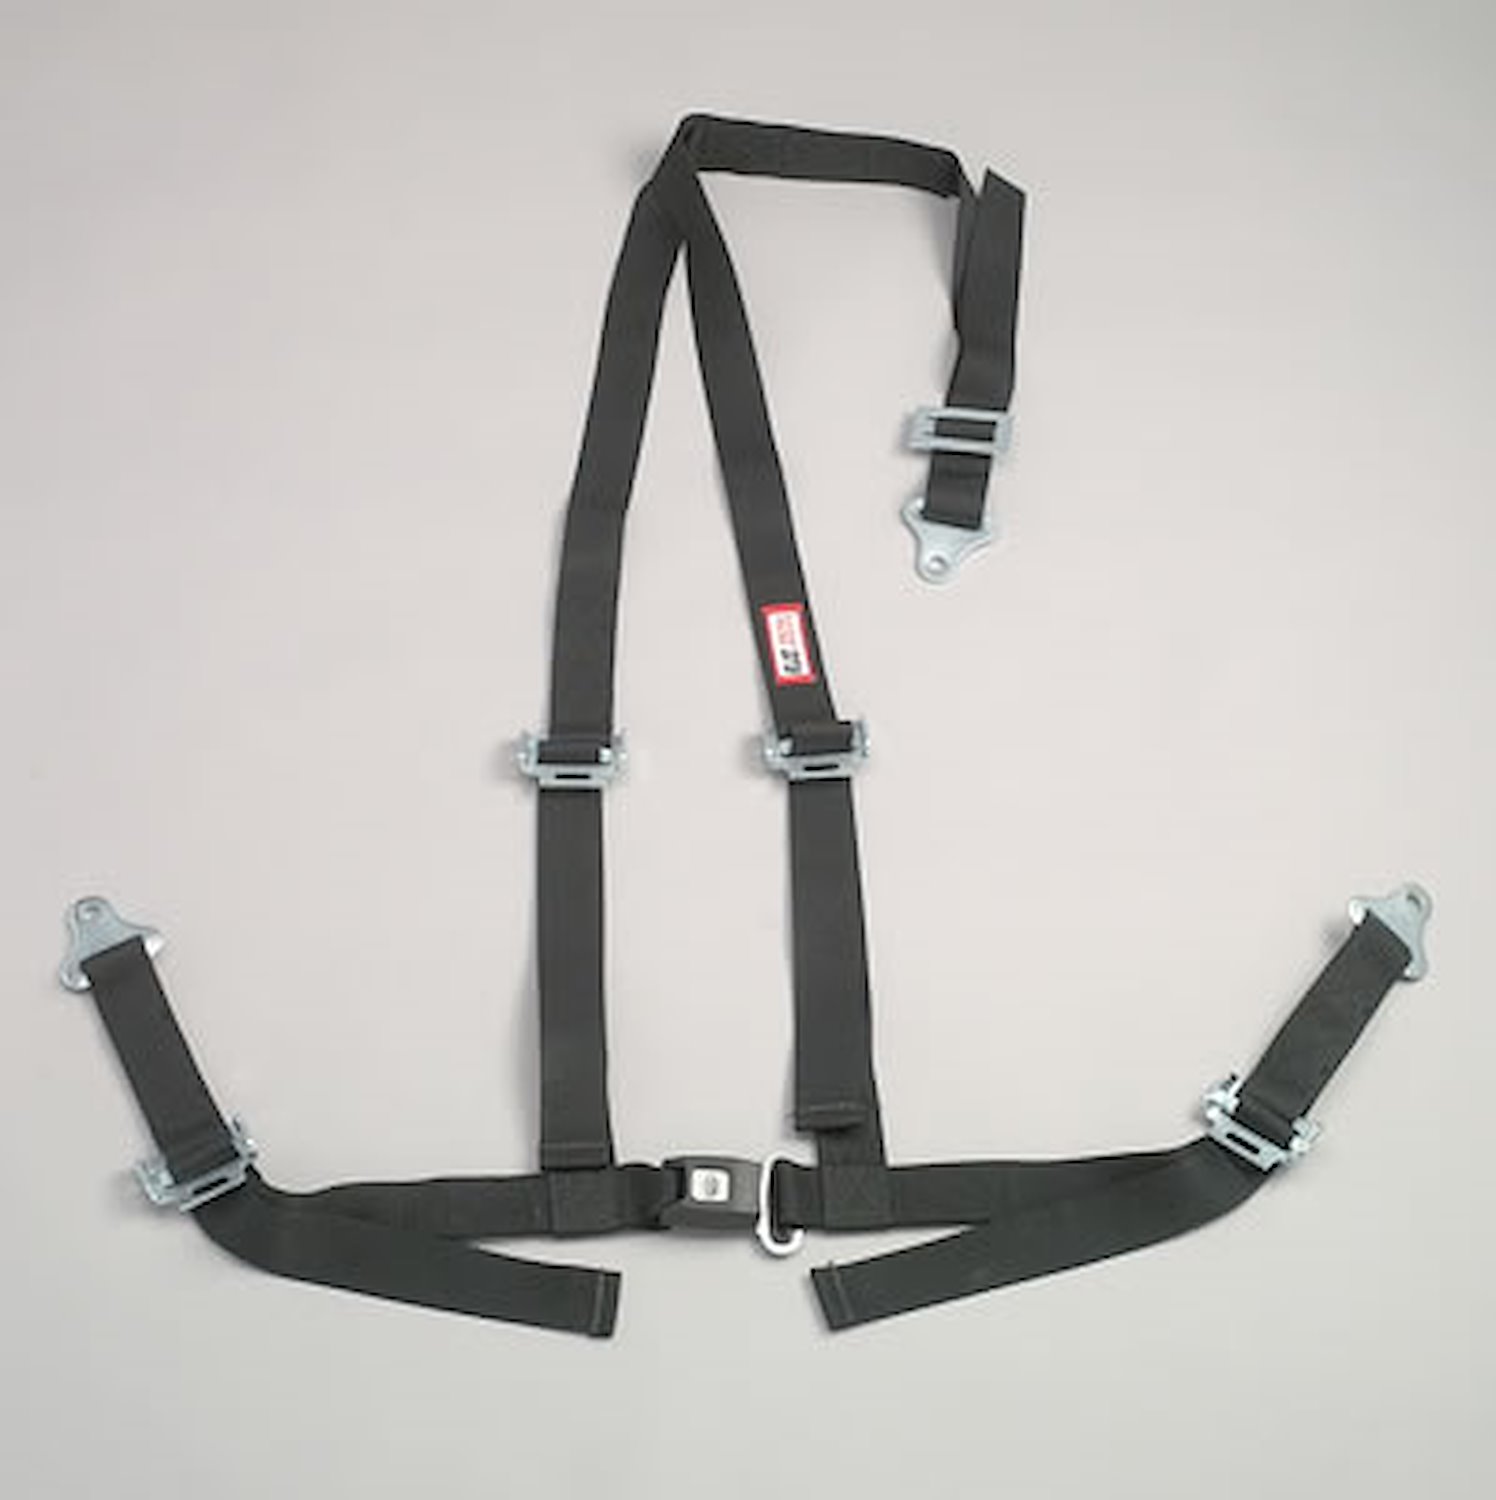 NON-SFI B&T HARNESS 2 PULL DOWN Lap Belt 2 S. H. Individual ROLL BAR Mount ALL WRAP ENDS w/STERNUM STRAP ORANGE